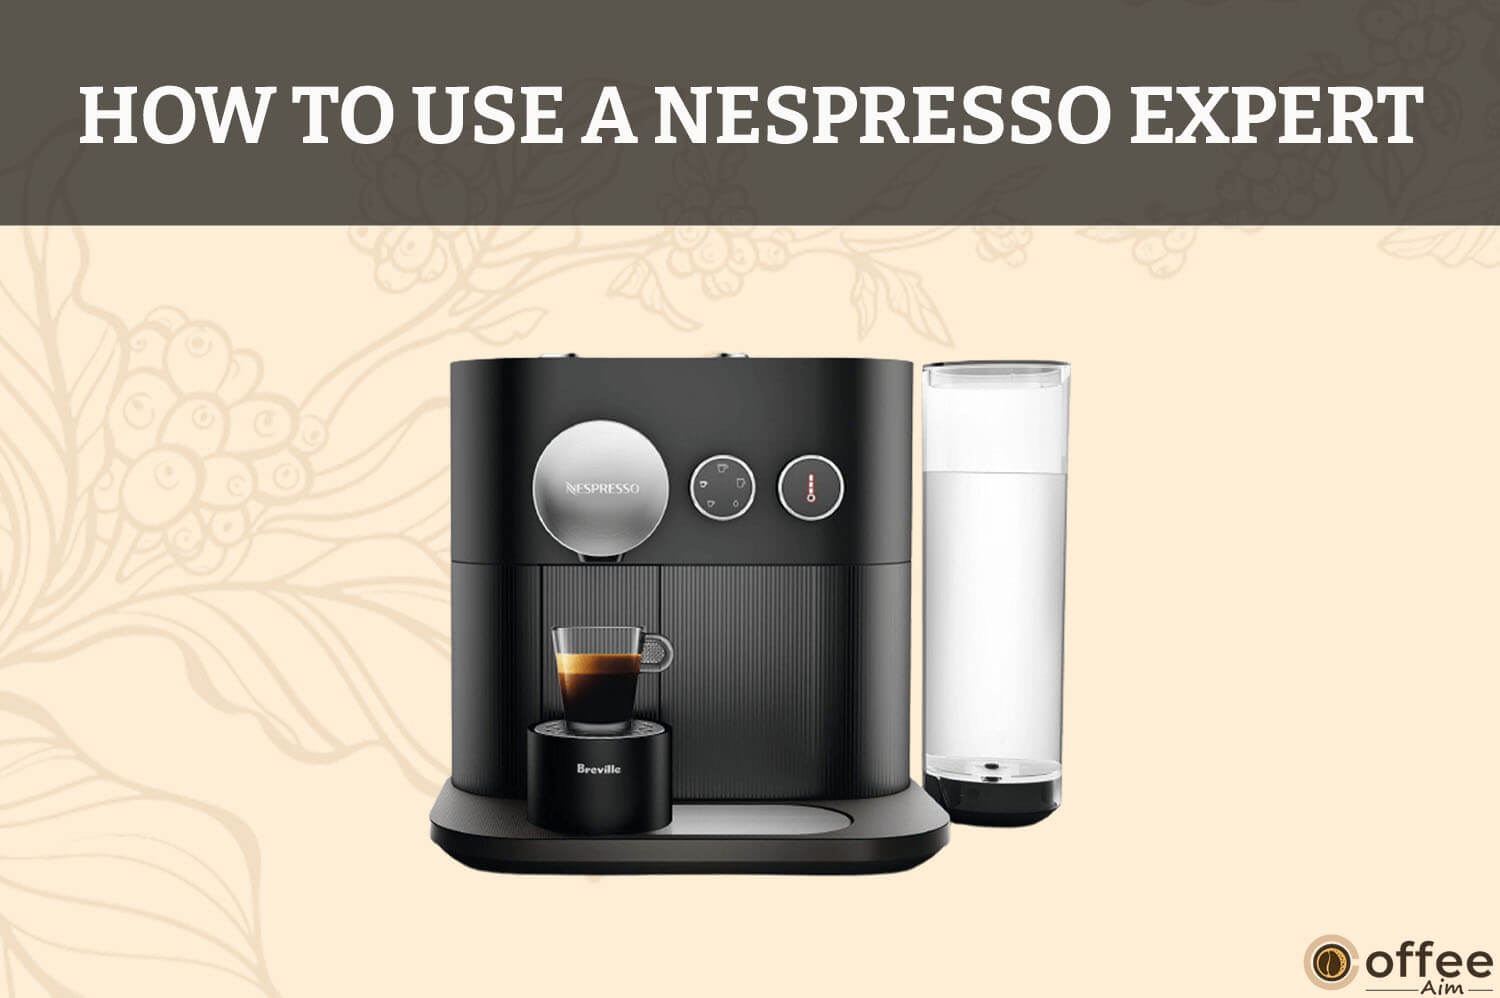 Featured image for the article "How to Use A Nespresso Expert"